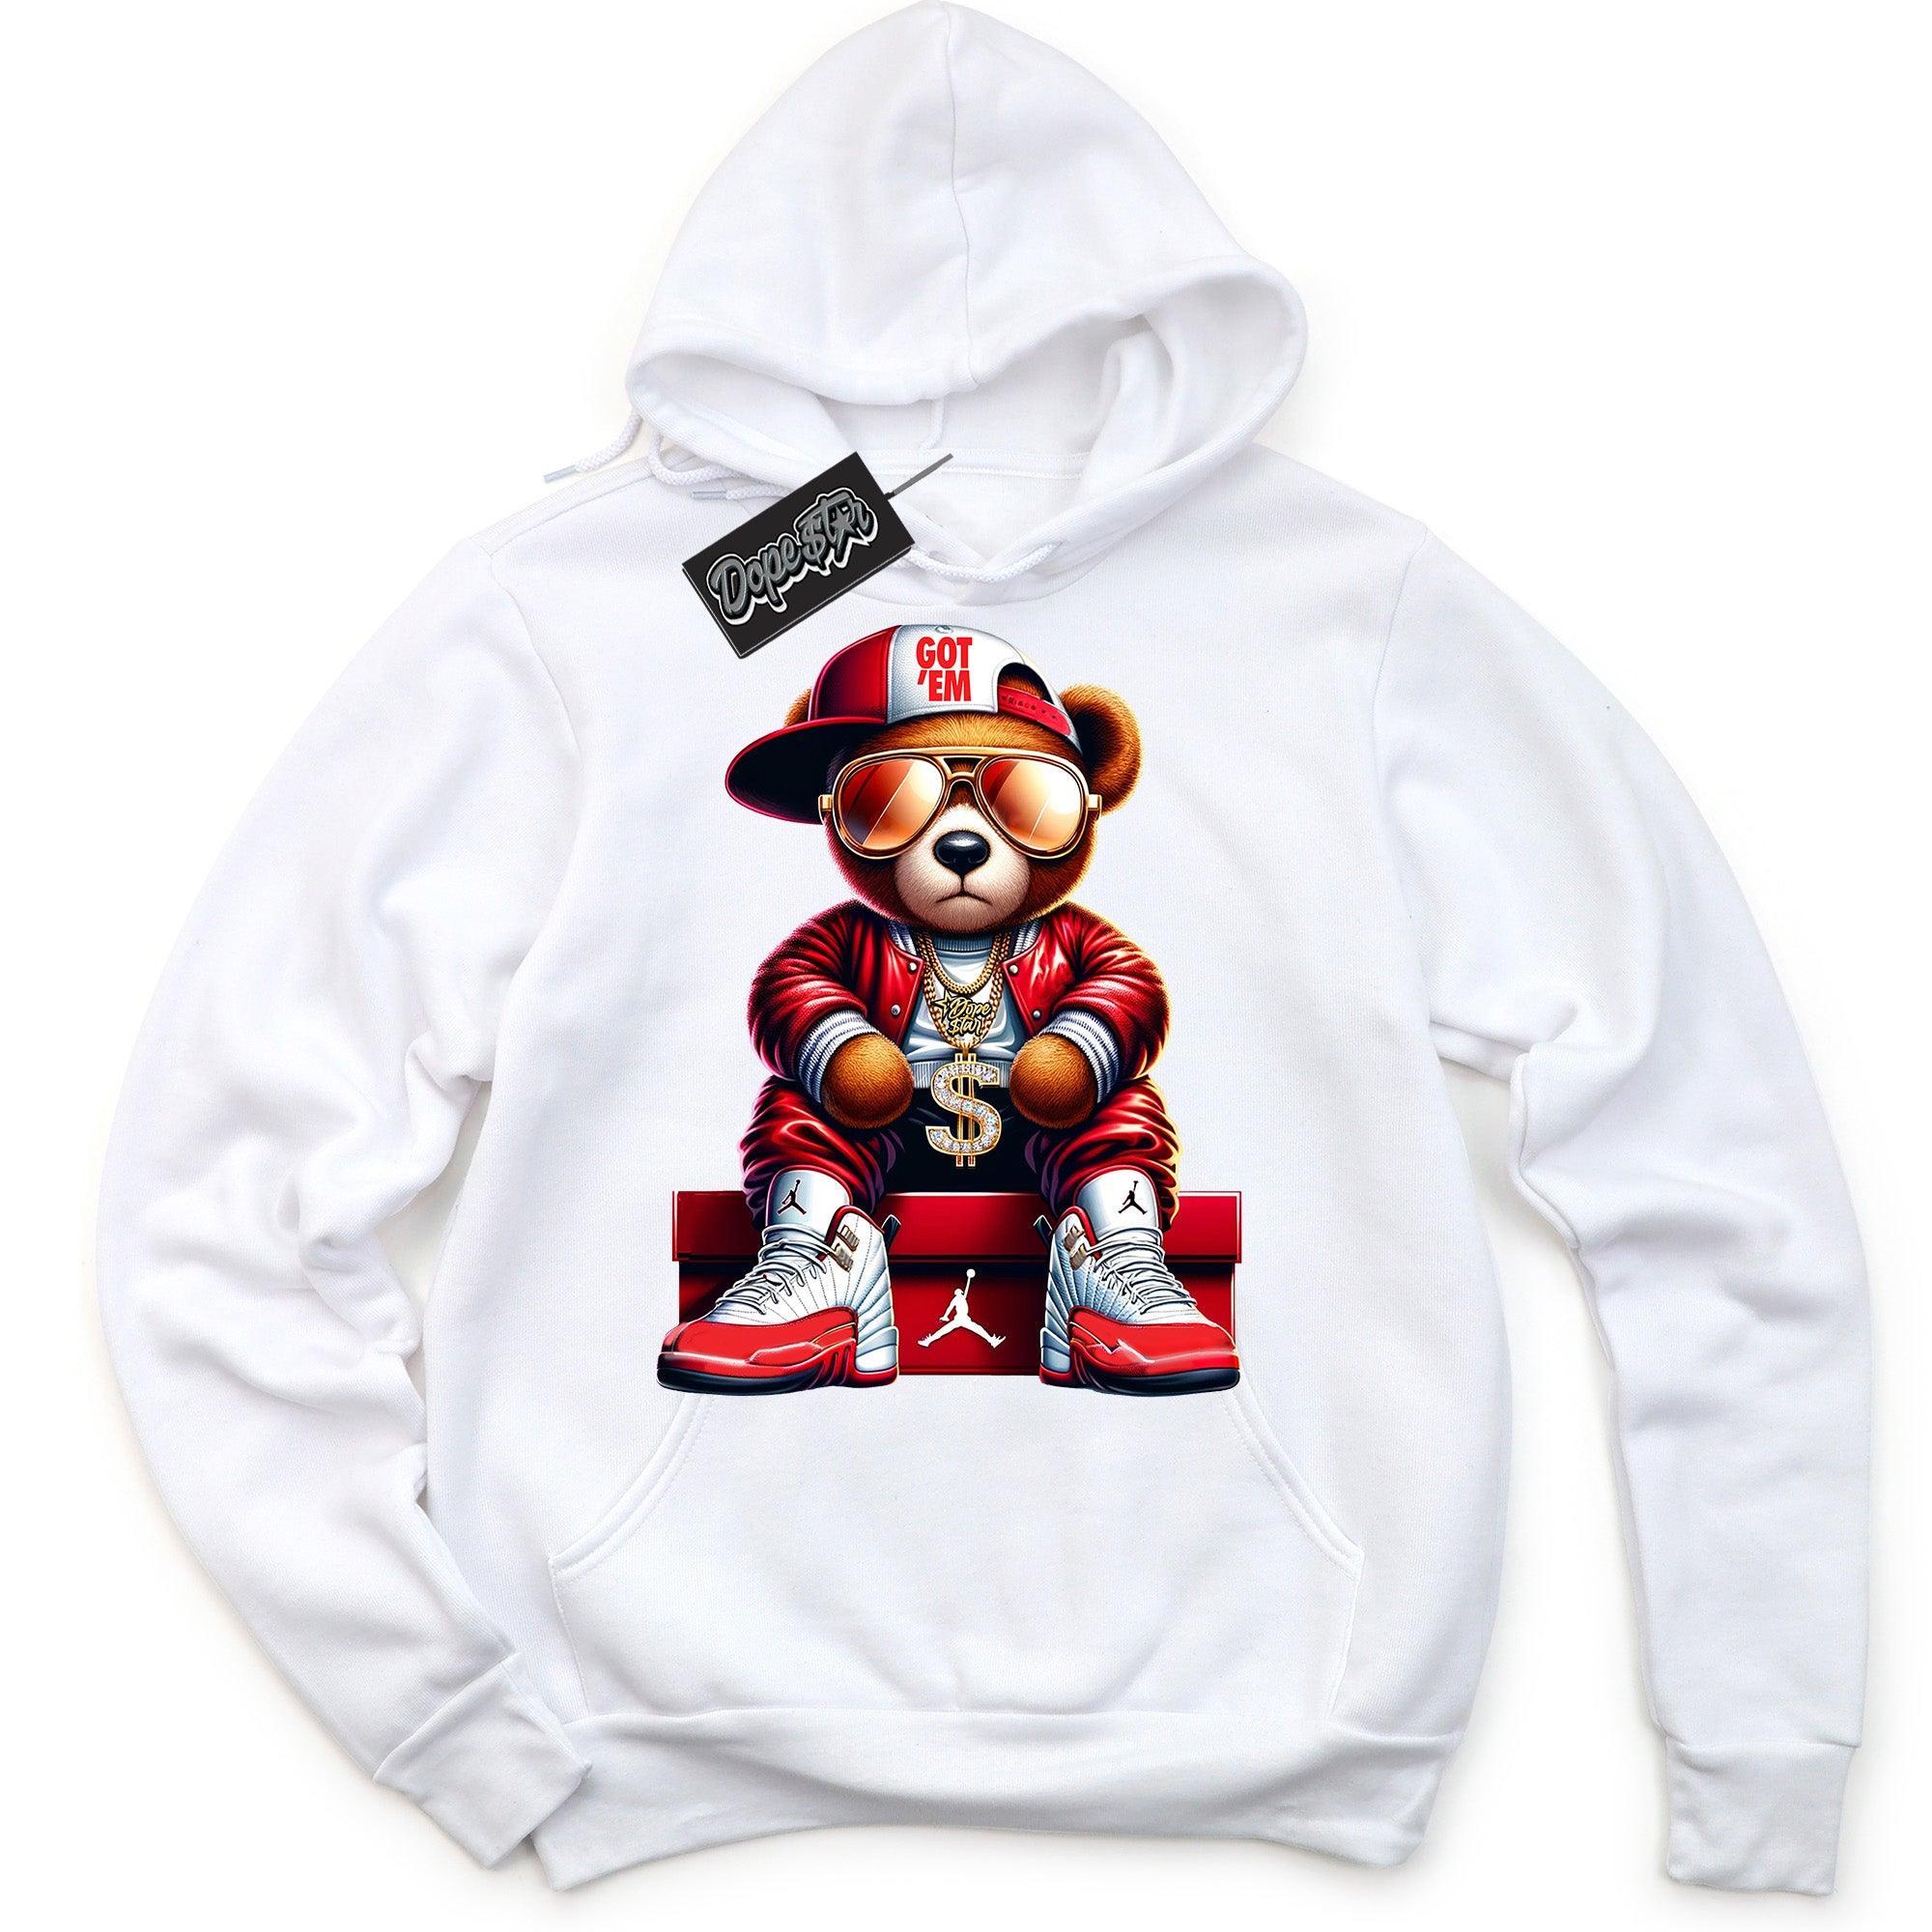 Cool White Graphic Hoodie with “ Get Em Bear “ print, that perfectly matches Air Jordan 12 Cherry sneakers